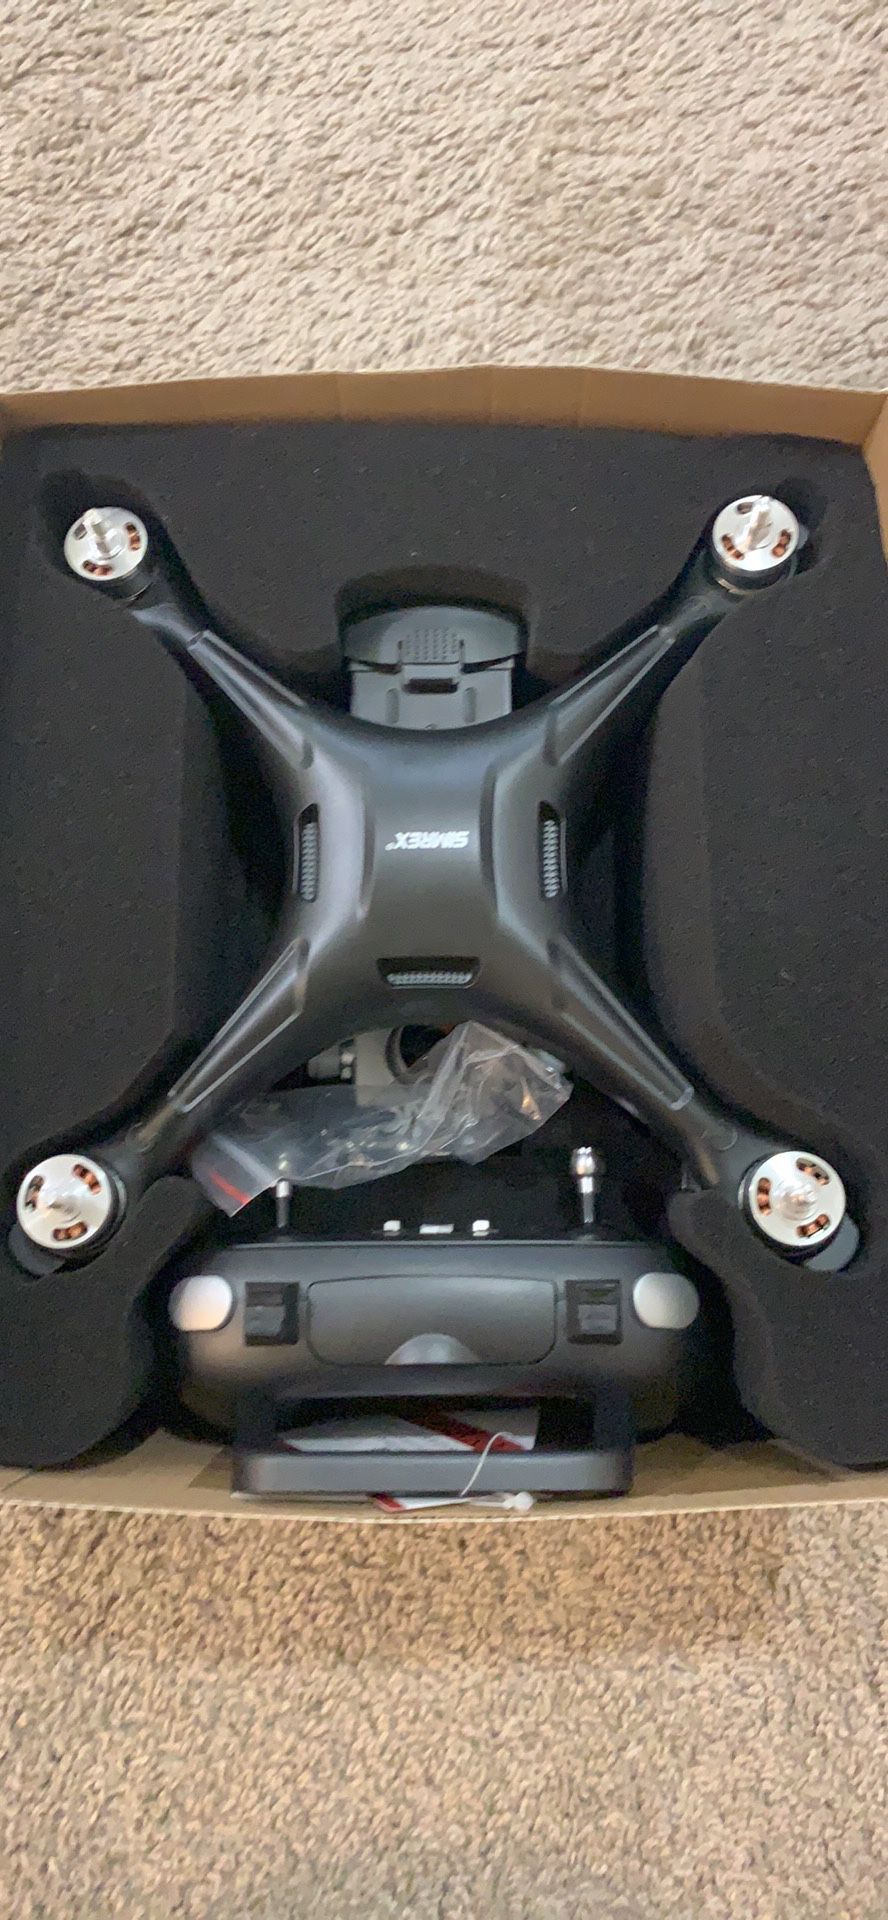 SIMREX x11 drone with professional camera